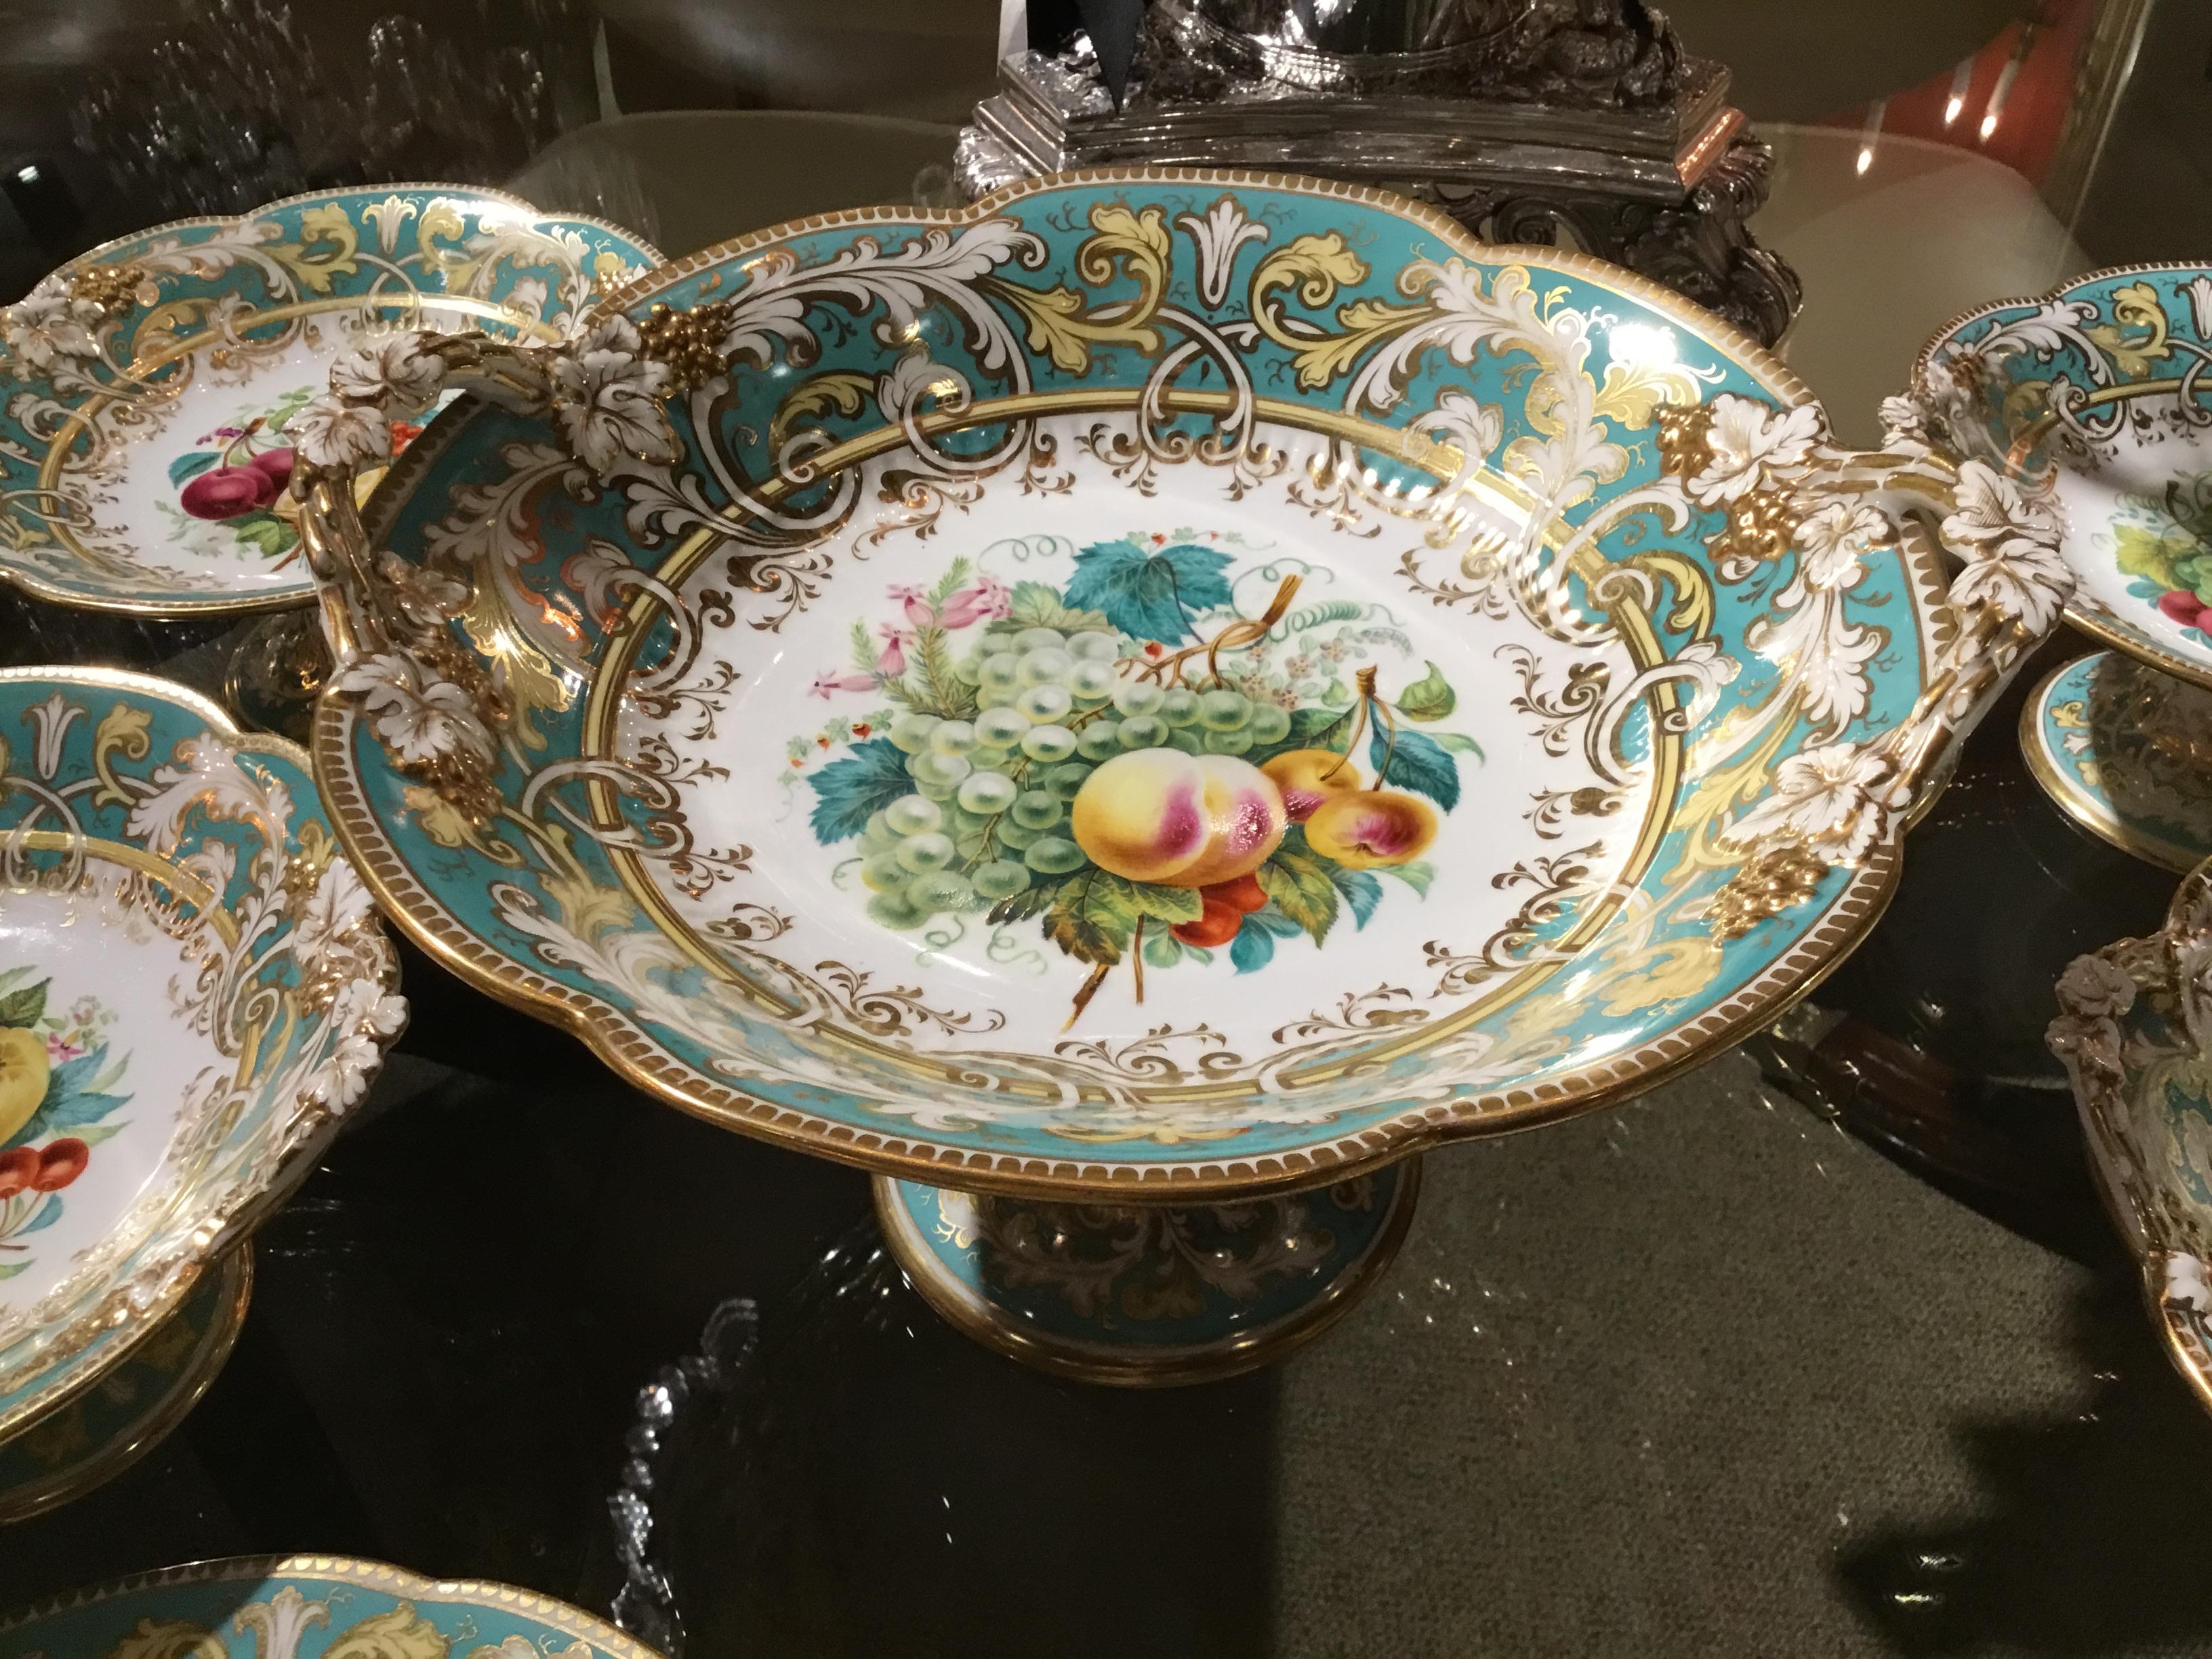 Exquisite set with multiple compotes and centerpiece. In lovely hues of green and a beautiful
Combination of colors at the center, featuring grapes and flowers. The handles in white and gold foliate design.
Comprised of:
One center piece 12”